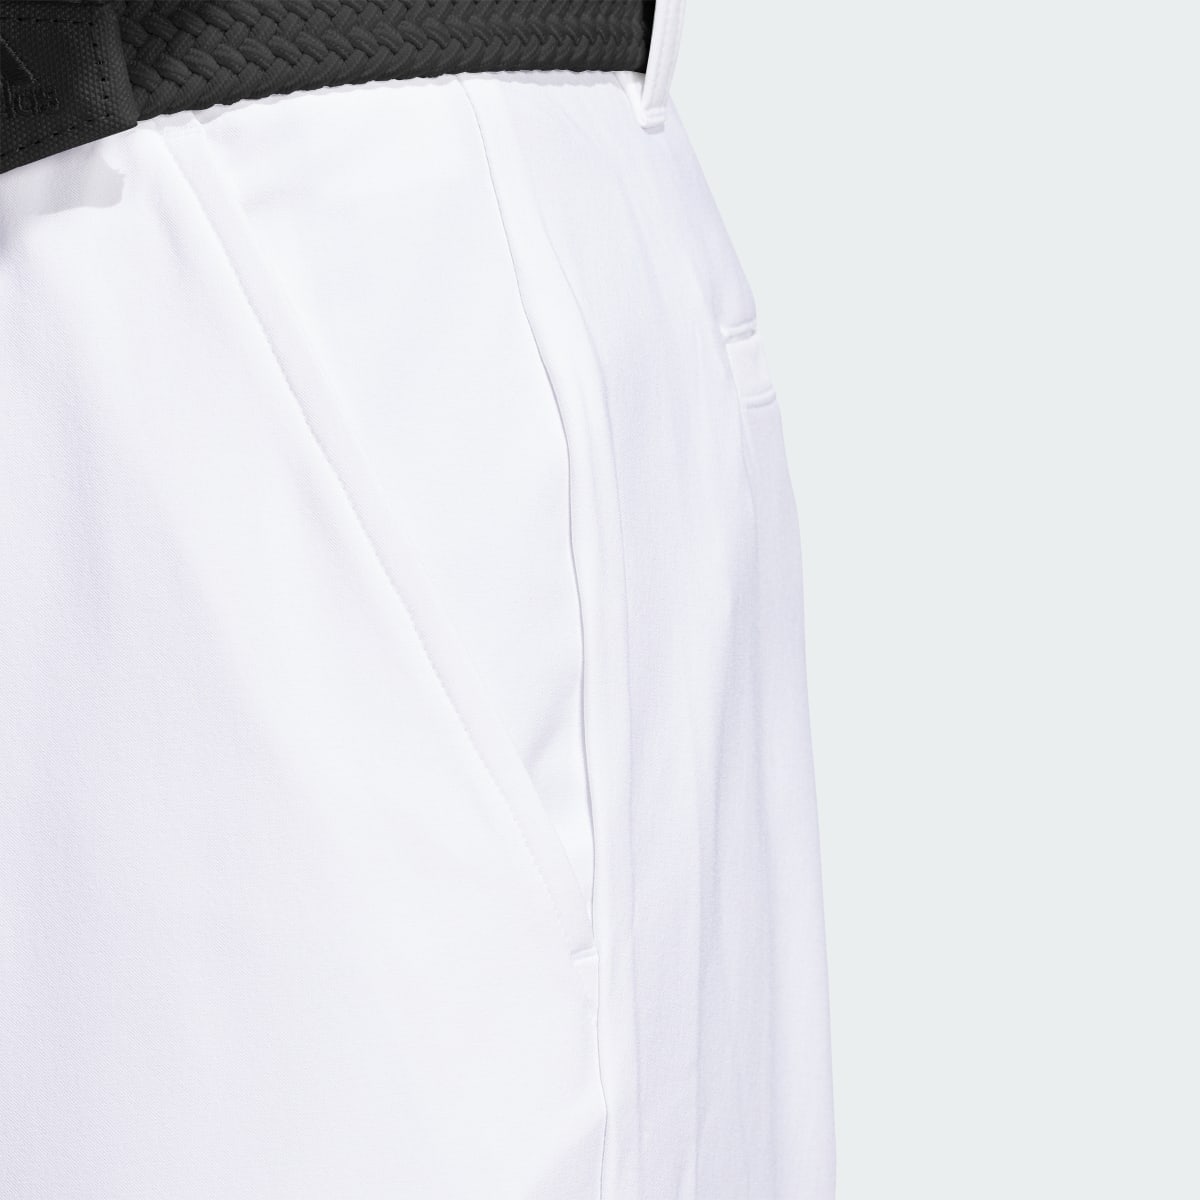 Adidas Ultimate365 Golf Trousers. 5